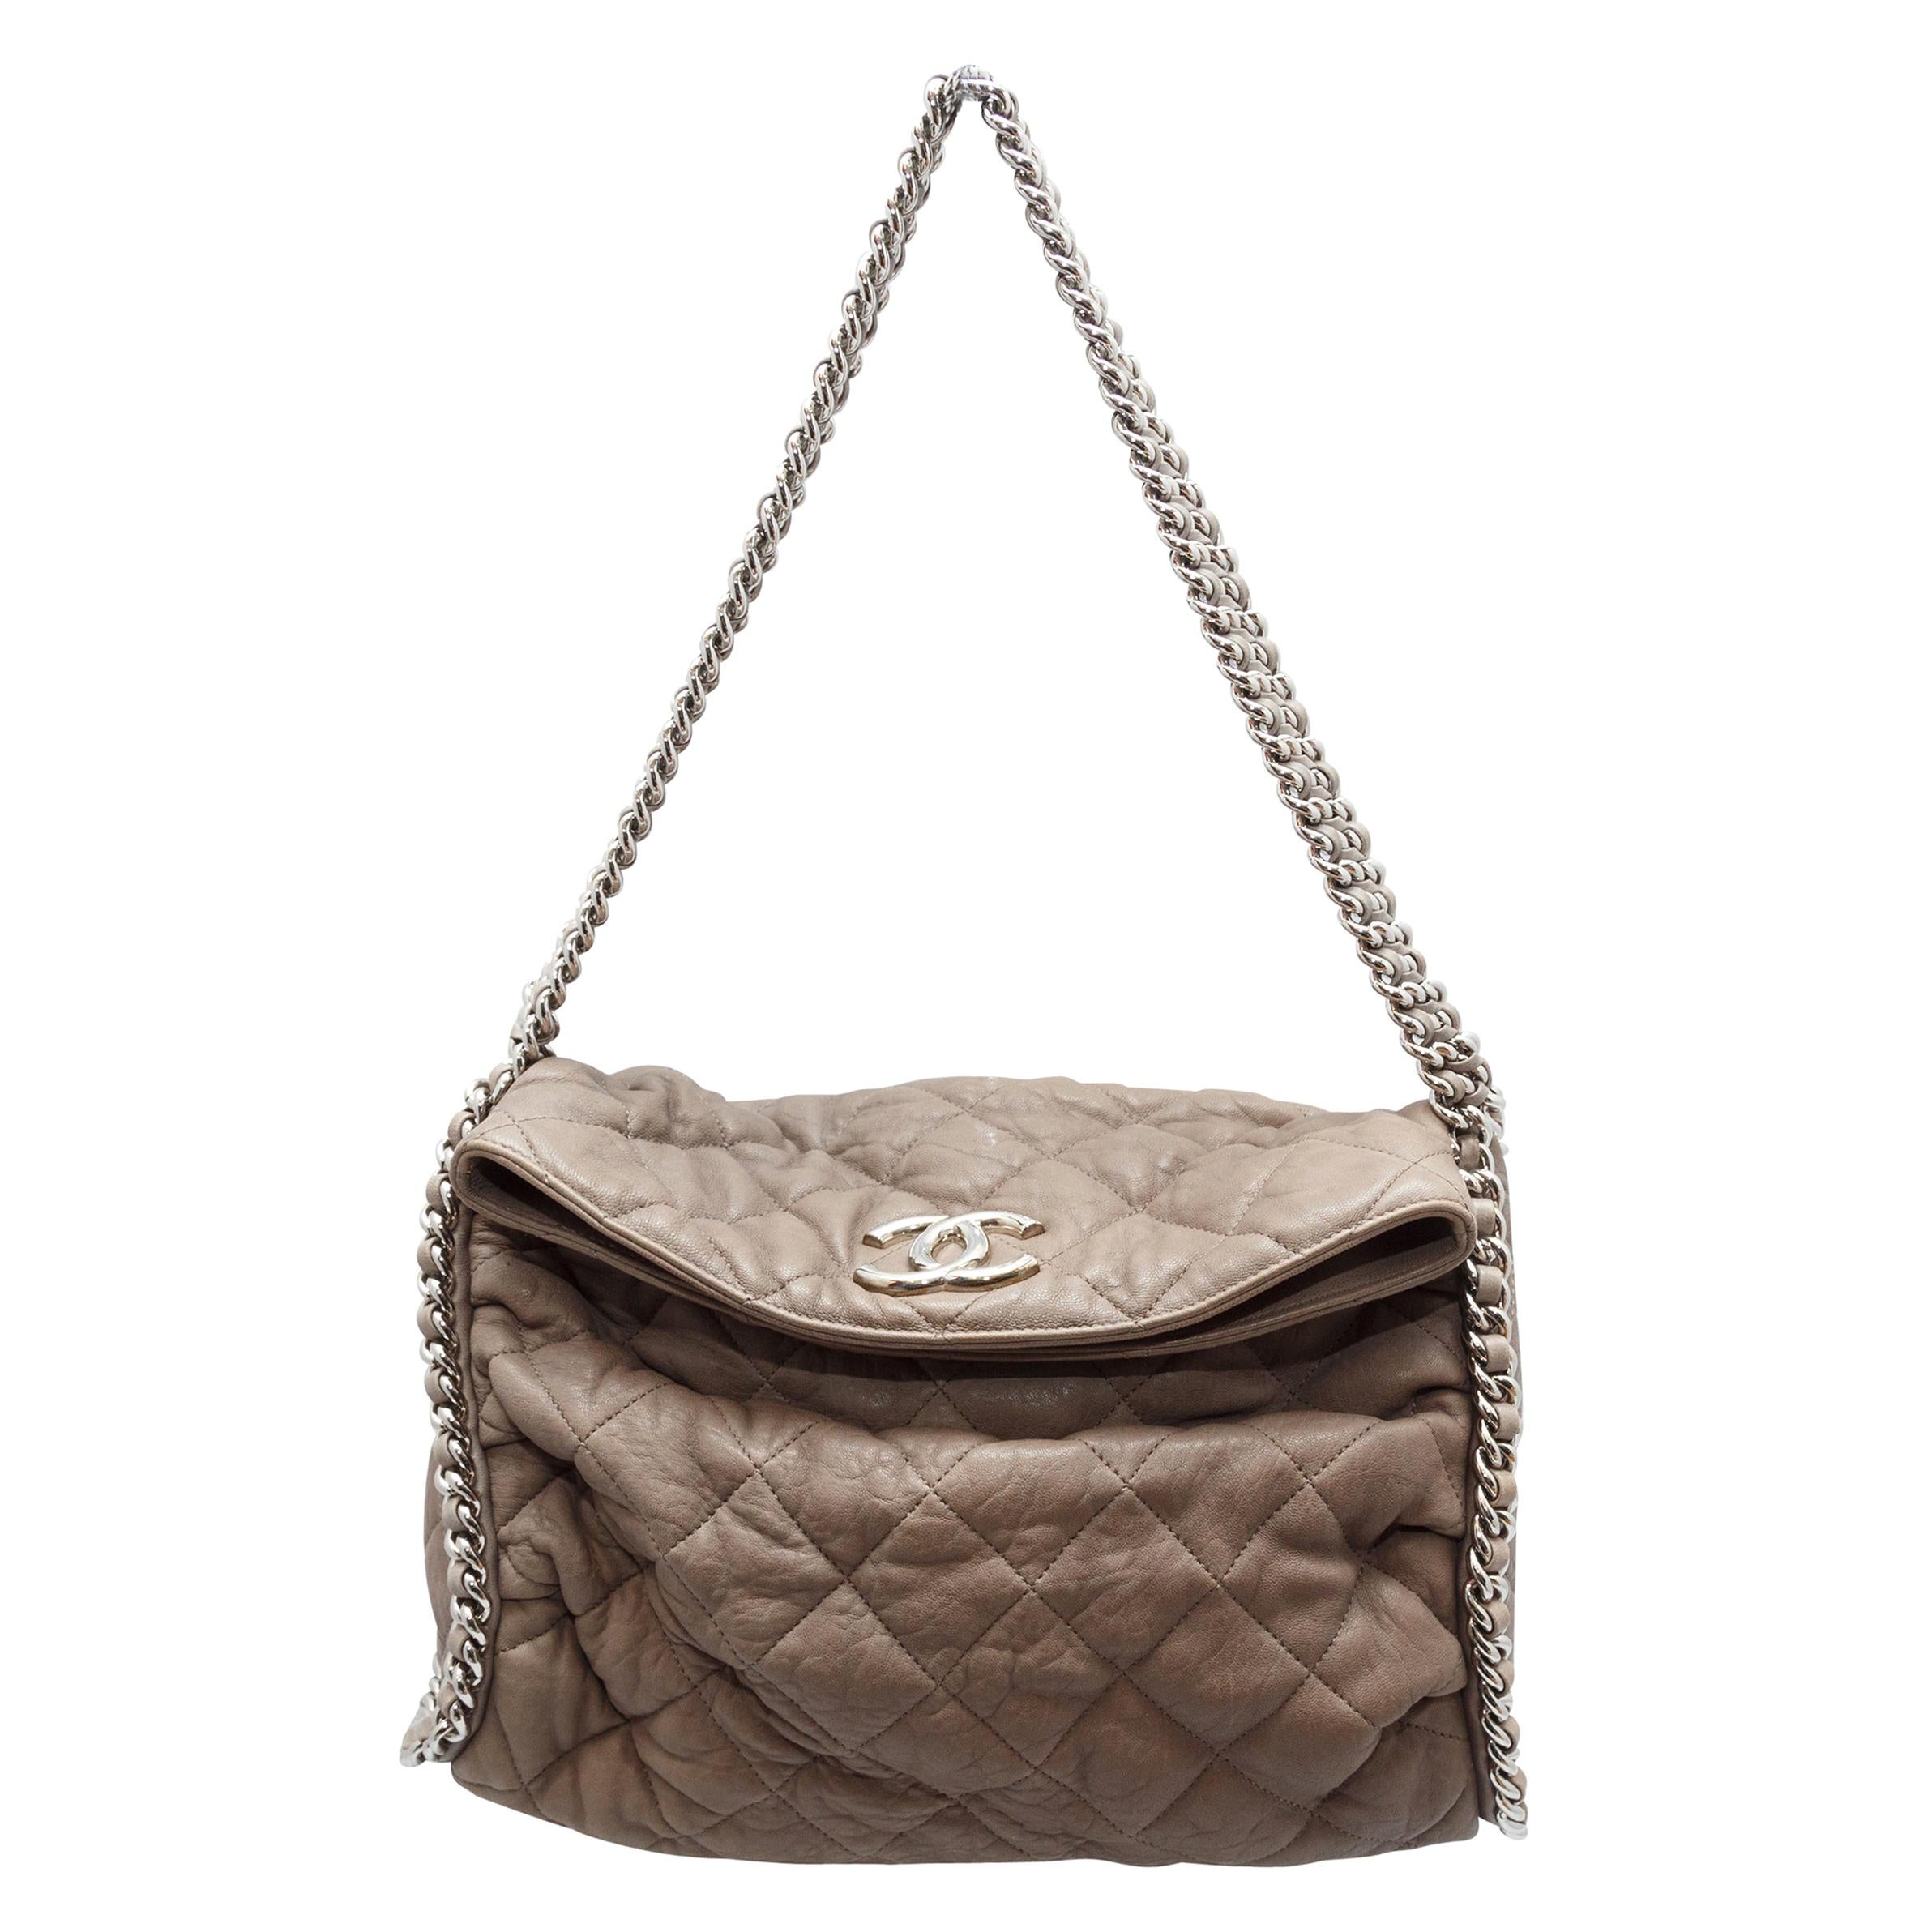 CHANEL Cotton Exterior Large Bags & Handbags for Women